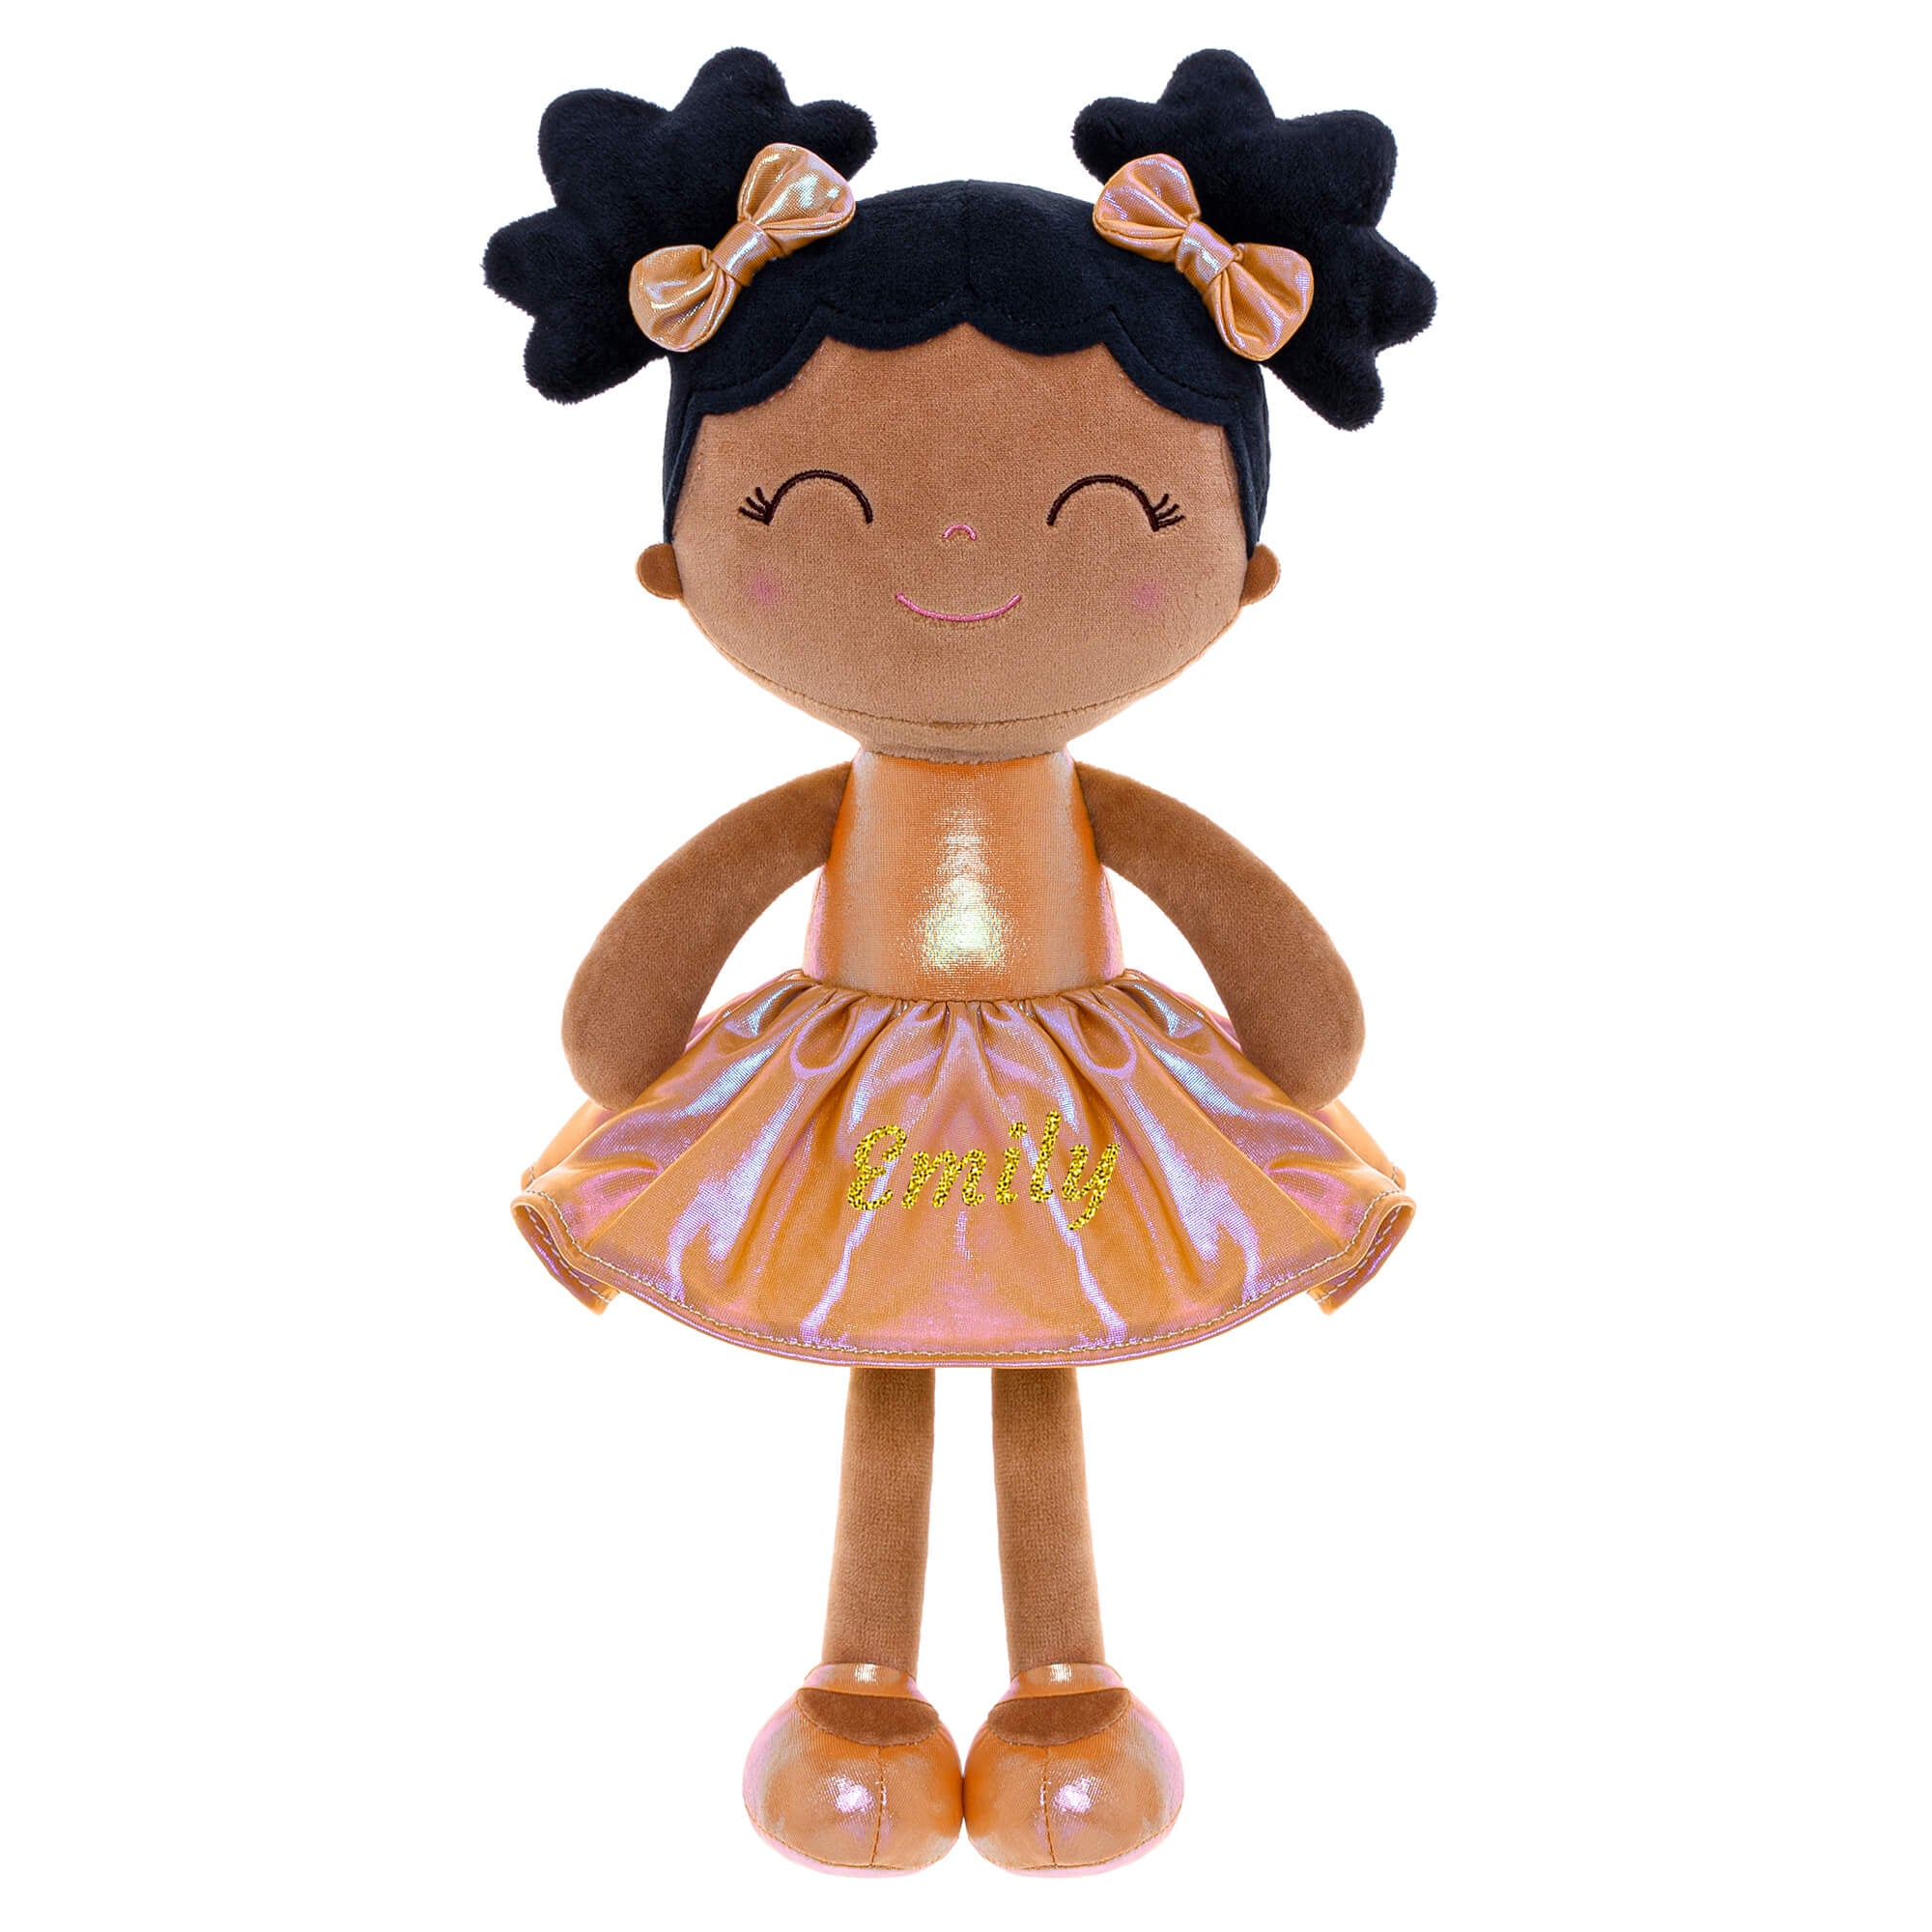 Gloveleya 12-inch Personalized Plush Dolls Curly Haired Iridescent Girls - Tanned Gold